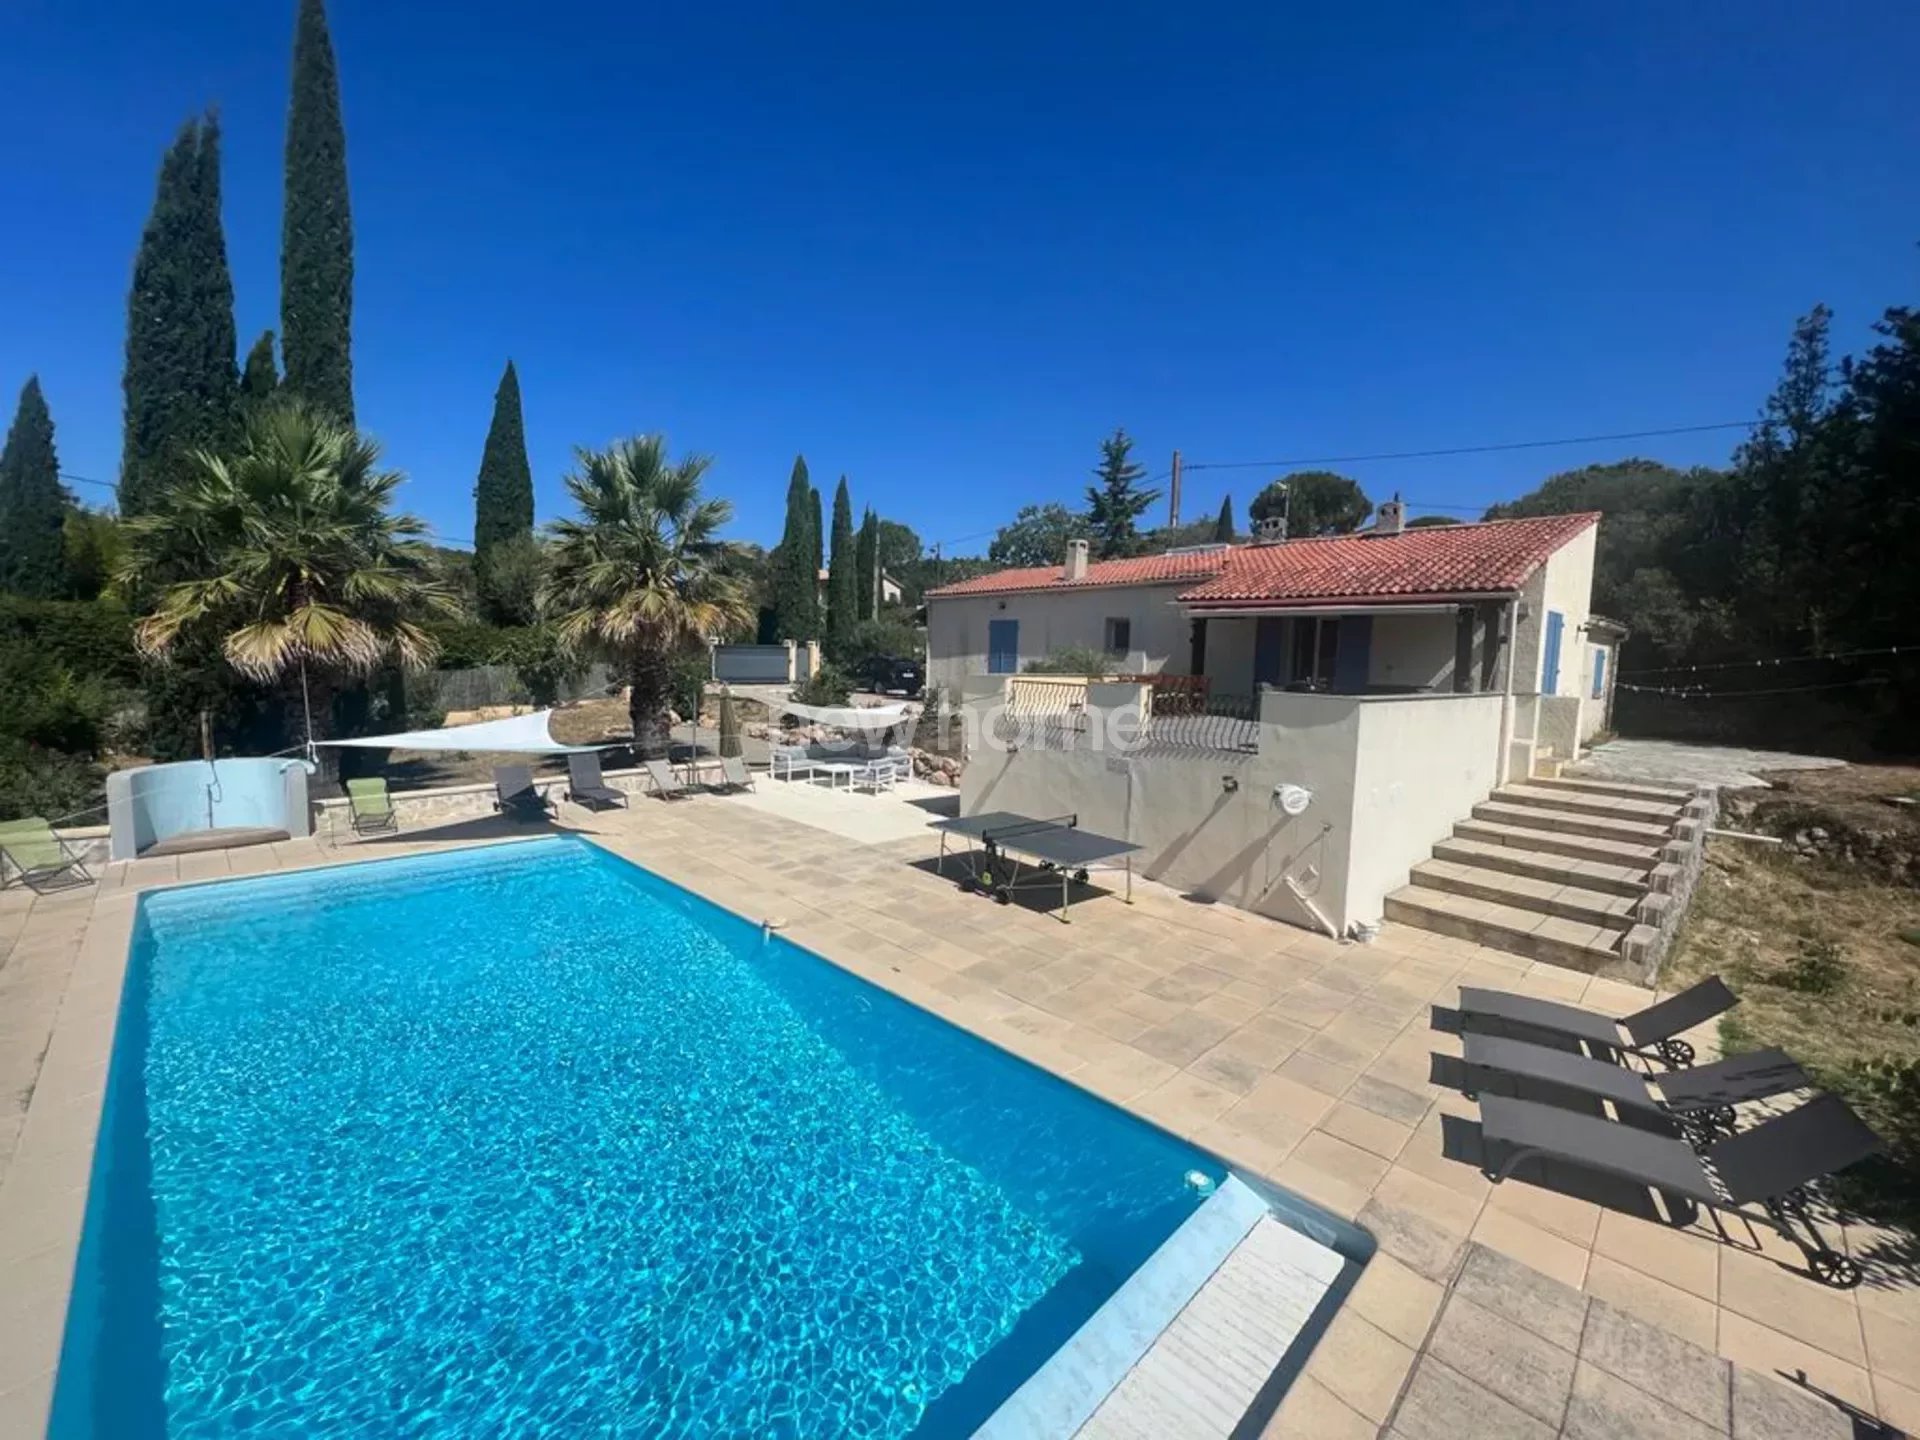 Villa with pool and within walking distance of Lorgues